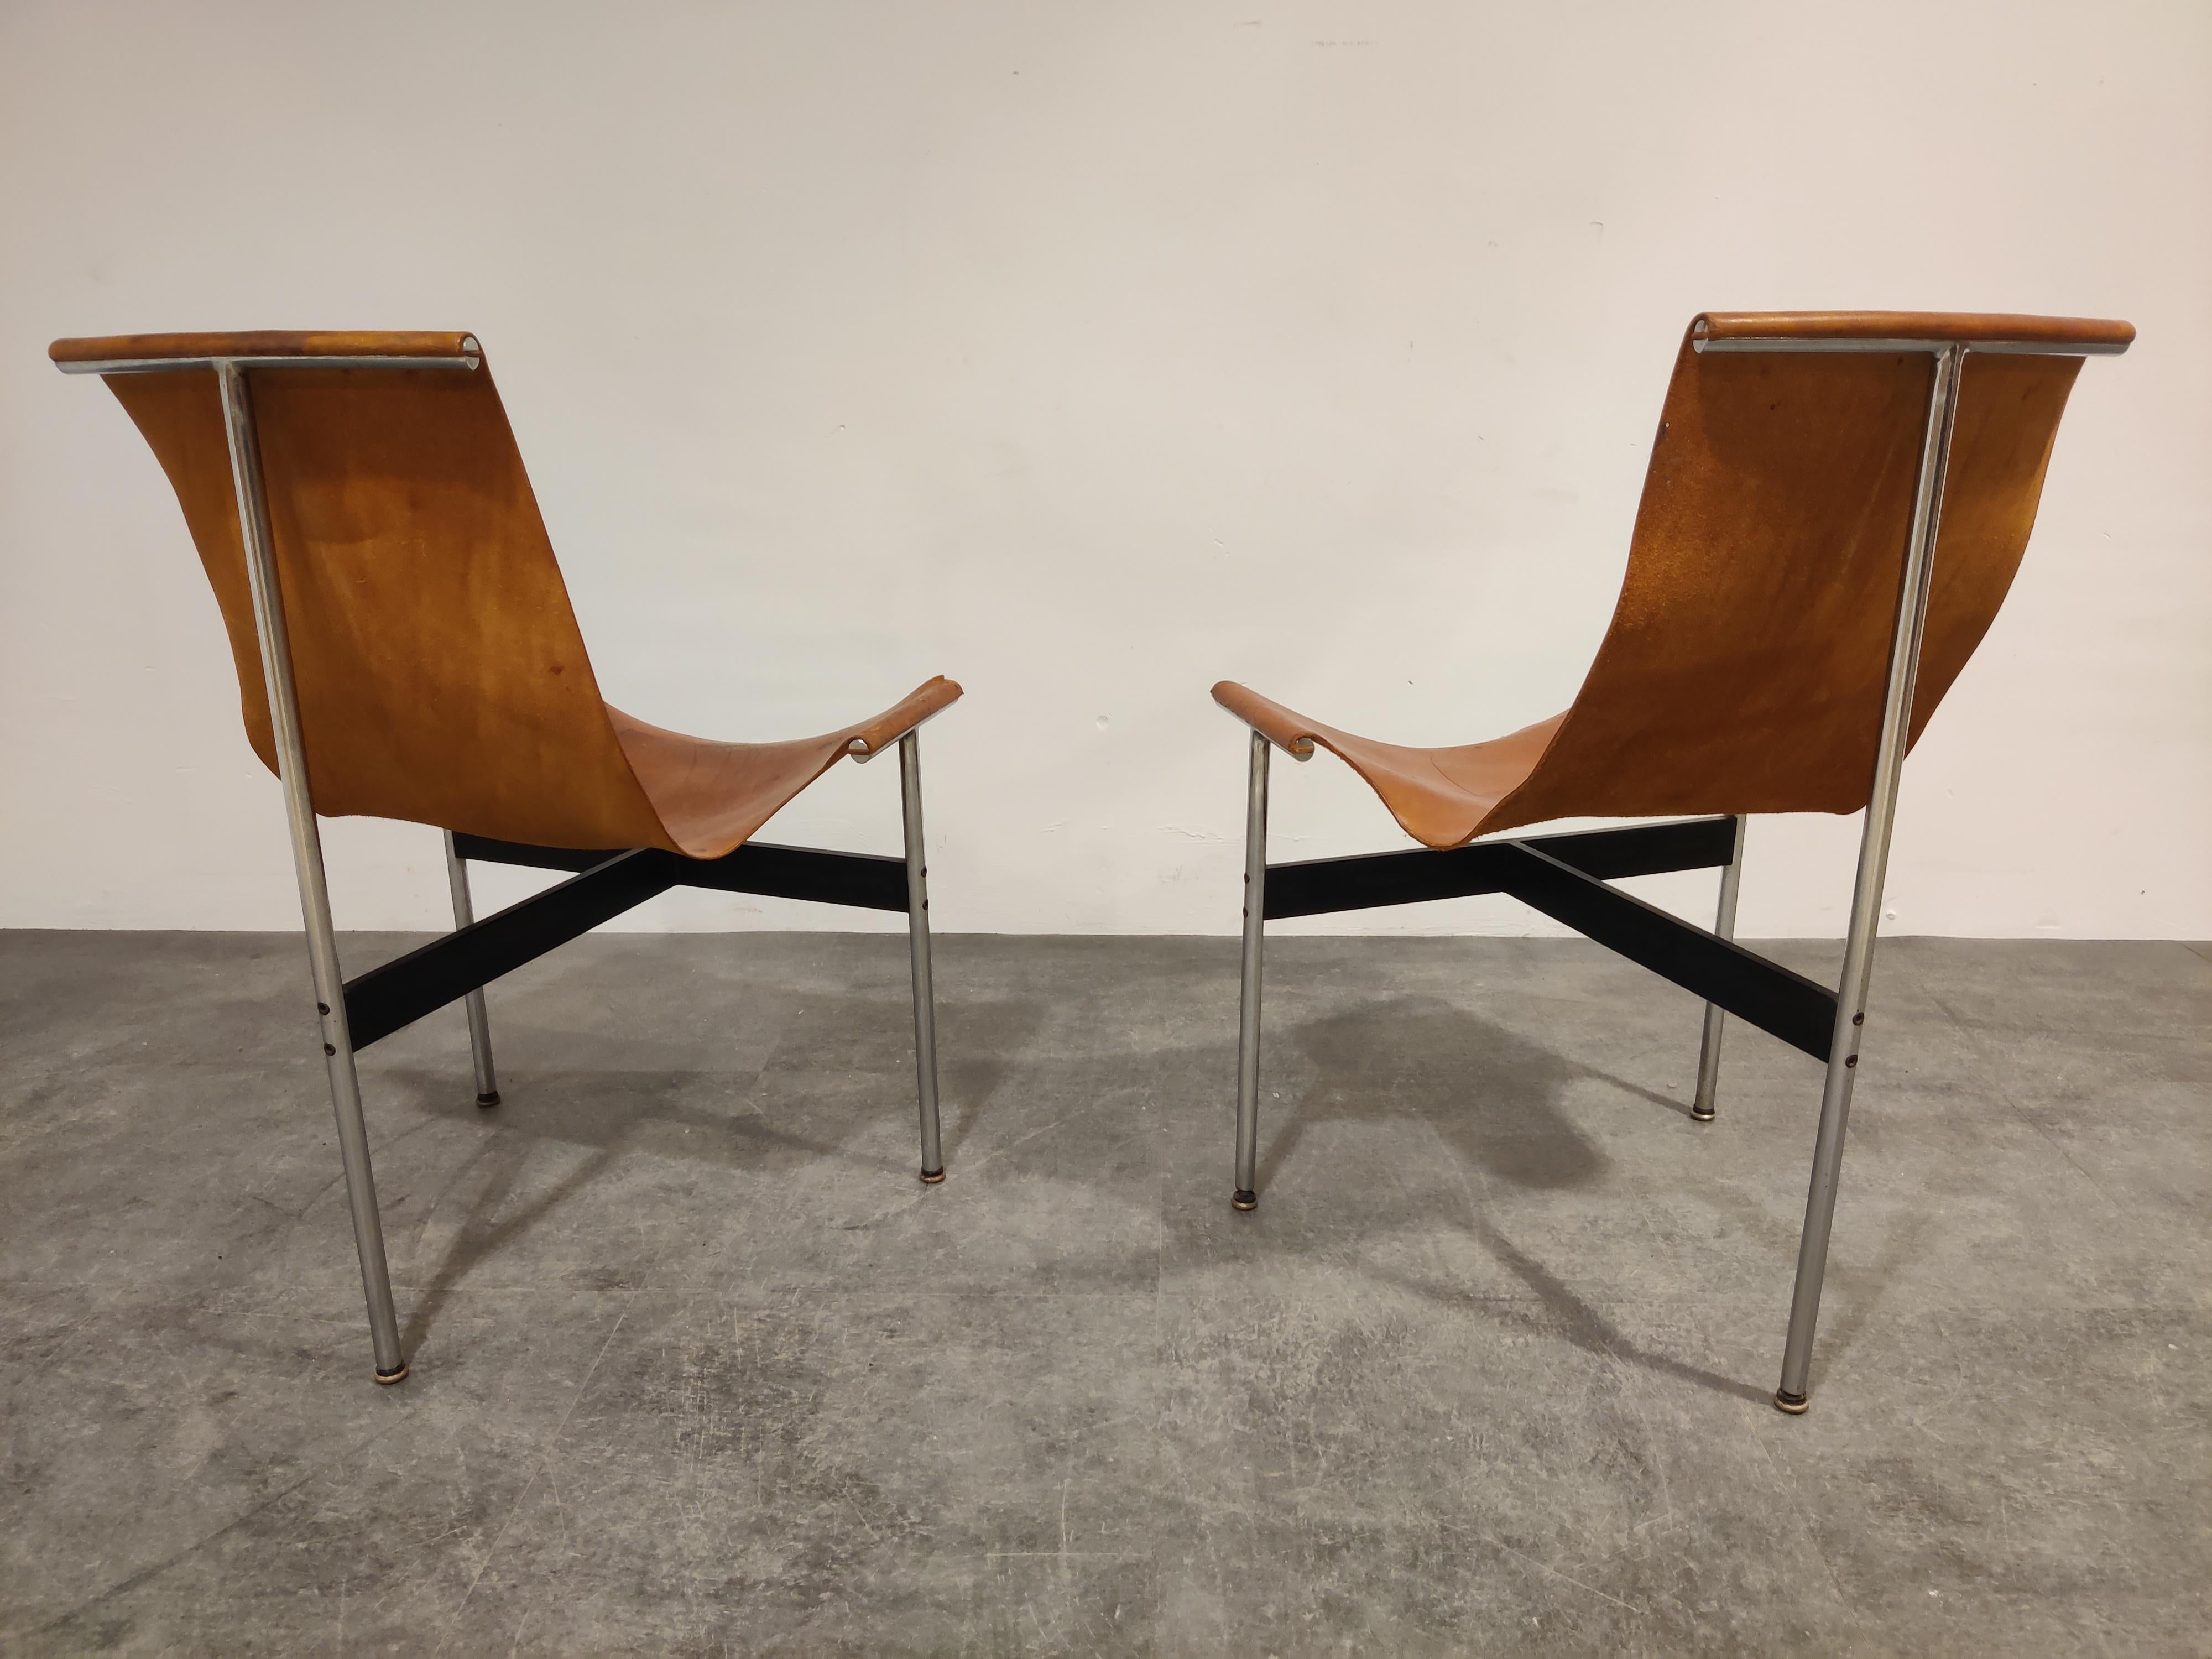 North American Pair of T Side Chairs by Katavolos, Littell & Kelley for Laverne International